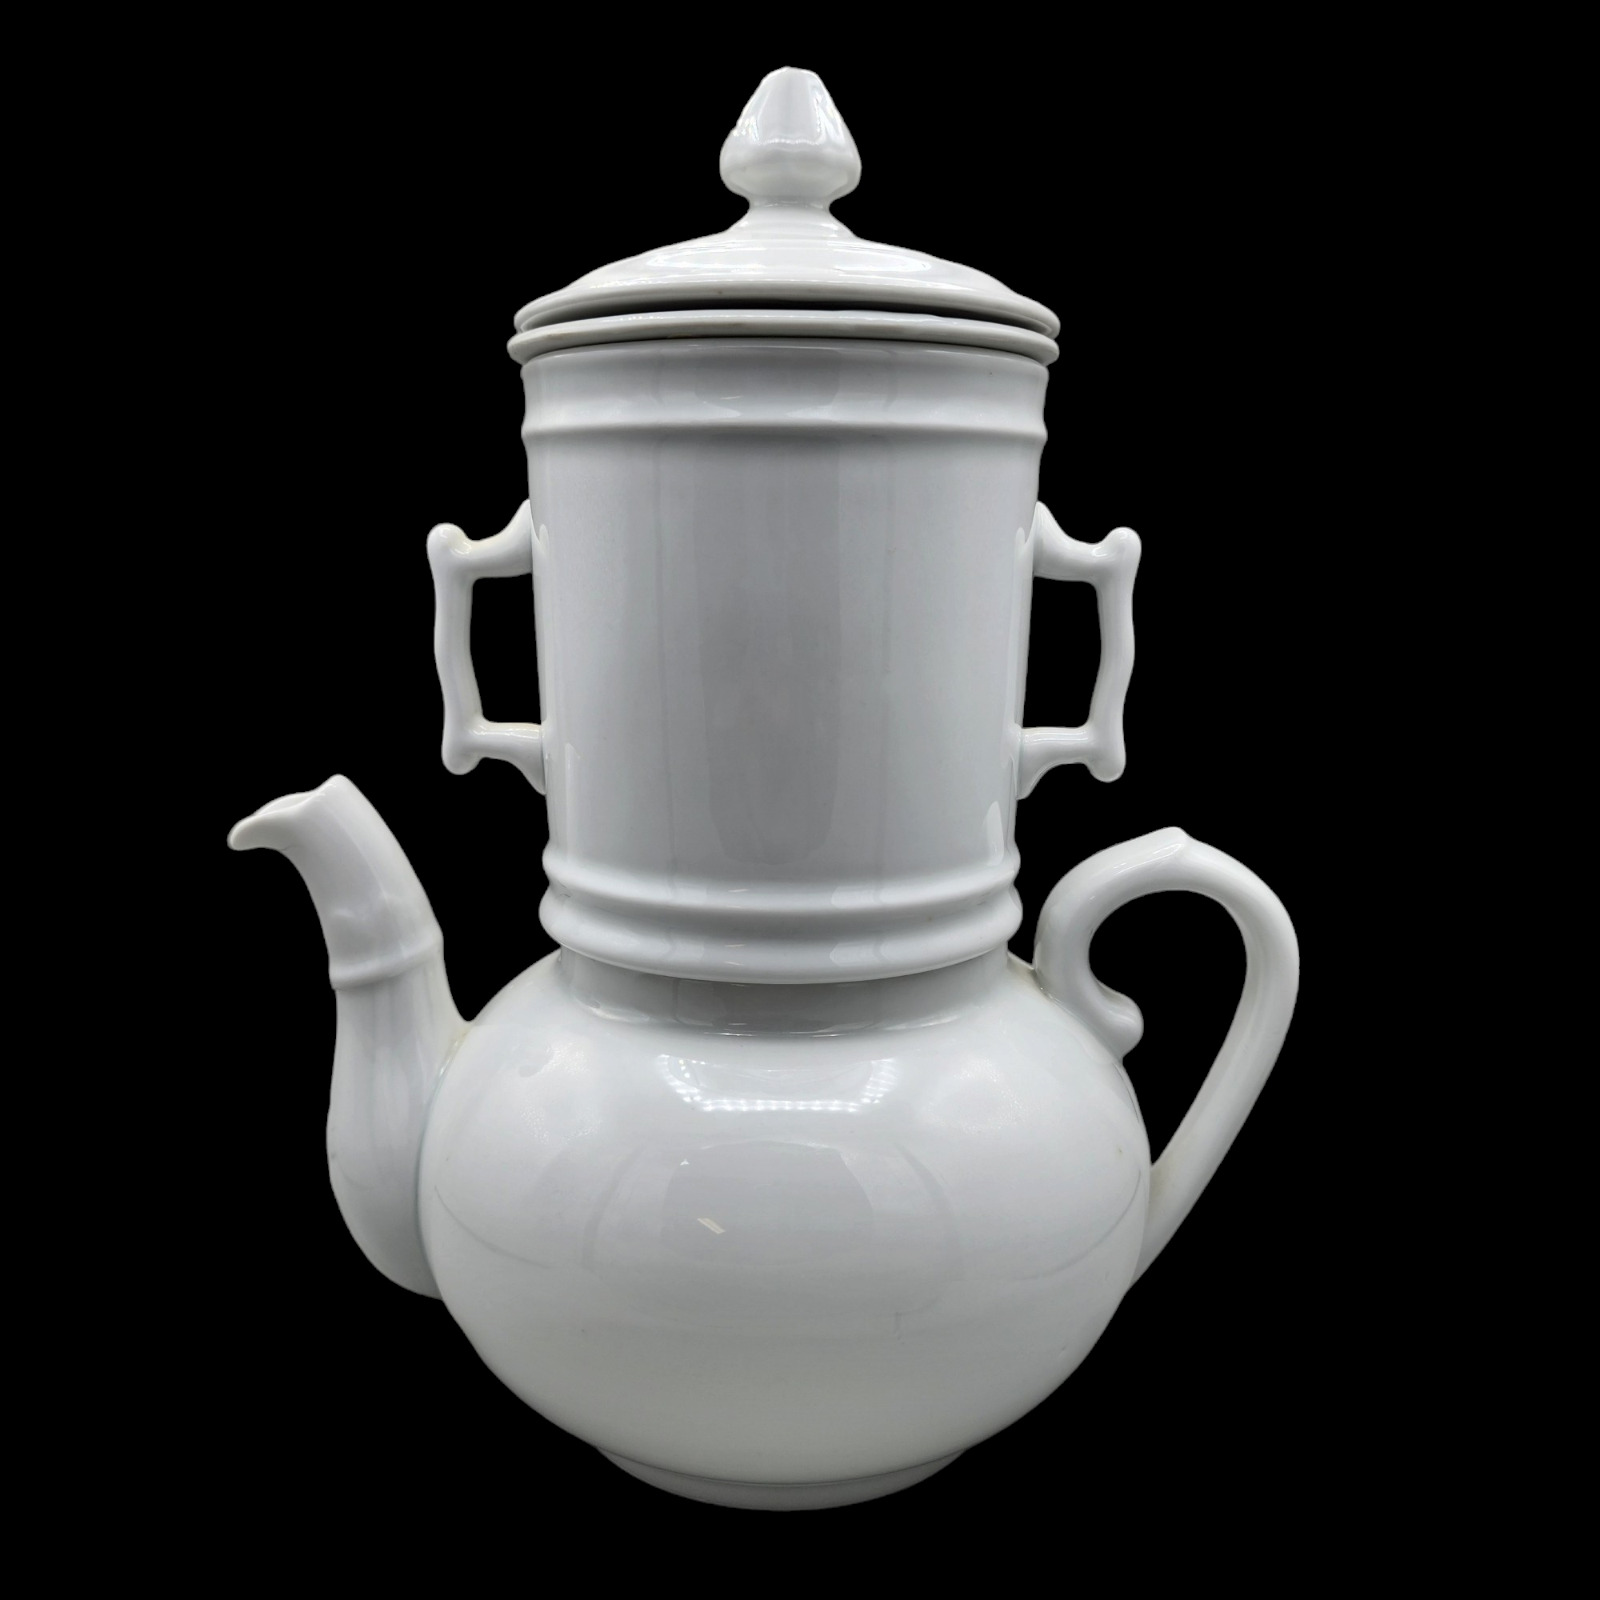 Vintage Pillivuyt Teapot Coffee French Drip Porcelain 4-Piece Stacking Ironstone